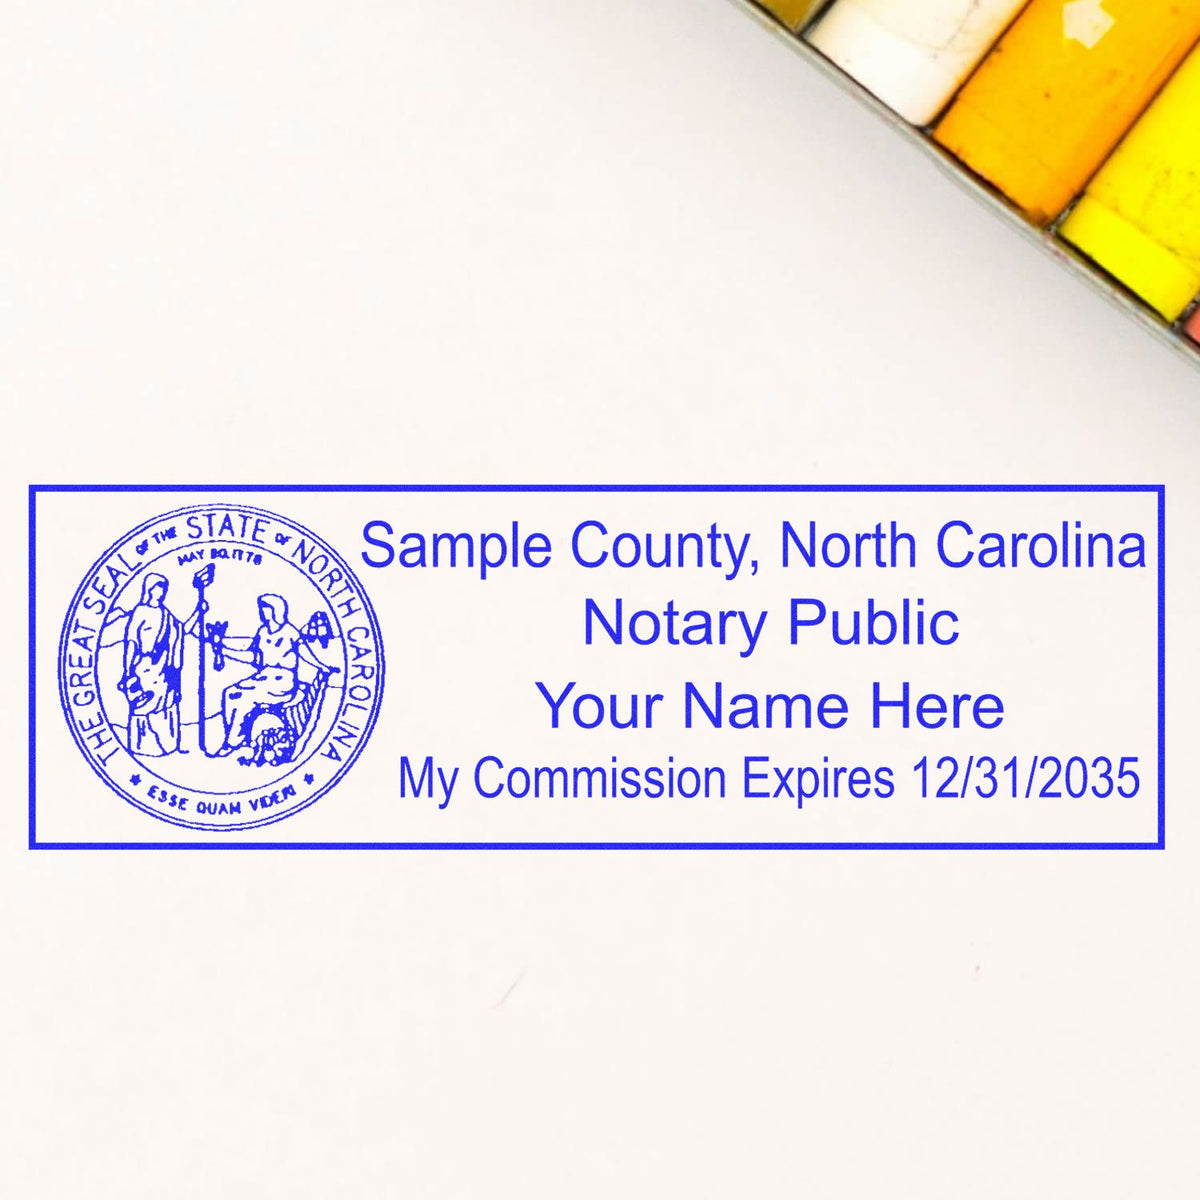 An alternative view of the Super Slim North Carolina Notary Public Stamp stamped on a sheet of paper showing the image in use